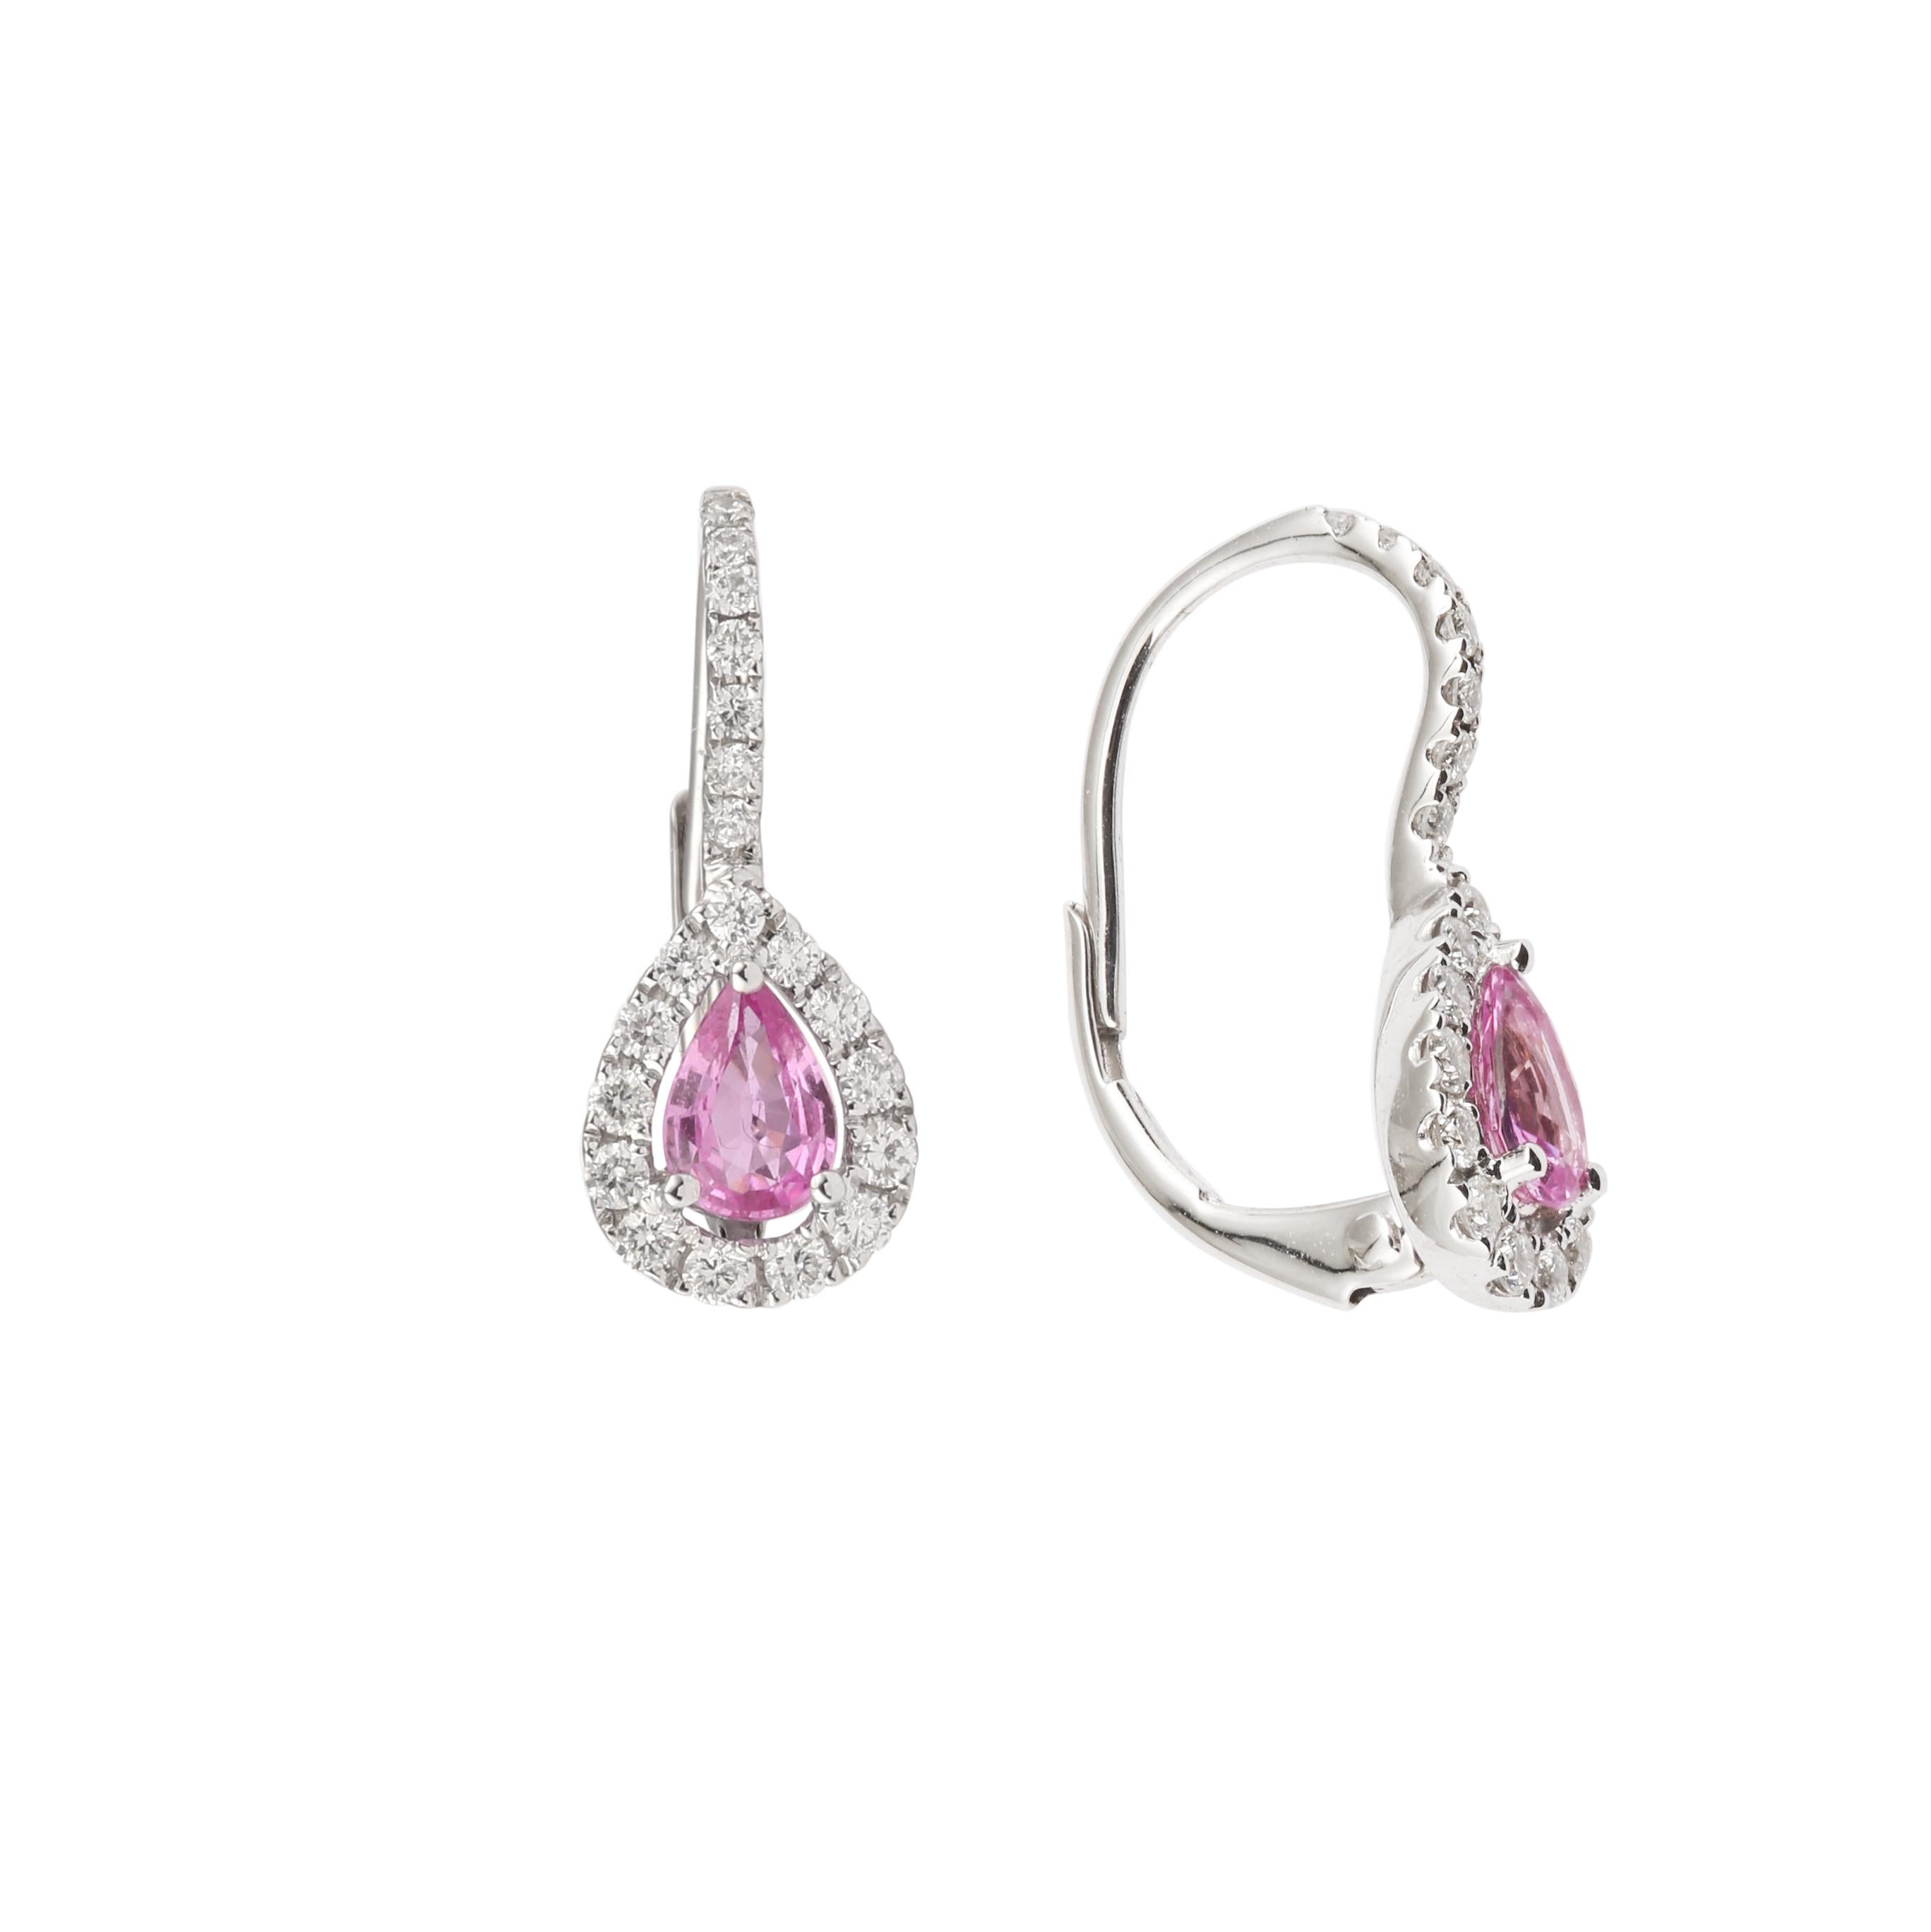 Pair of white gold dormeuses set with pear-cut pink sapphires surrounded by brilliant-cut diamonds.

Total weight of pink sapphires: 0.84 carats

Total weight of diamonds: 0.46 carats

Dimensions : 18.70 x 7.80 x 3.34 mm (0.736 x 0.307 x 0.131